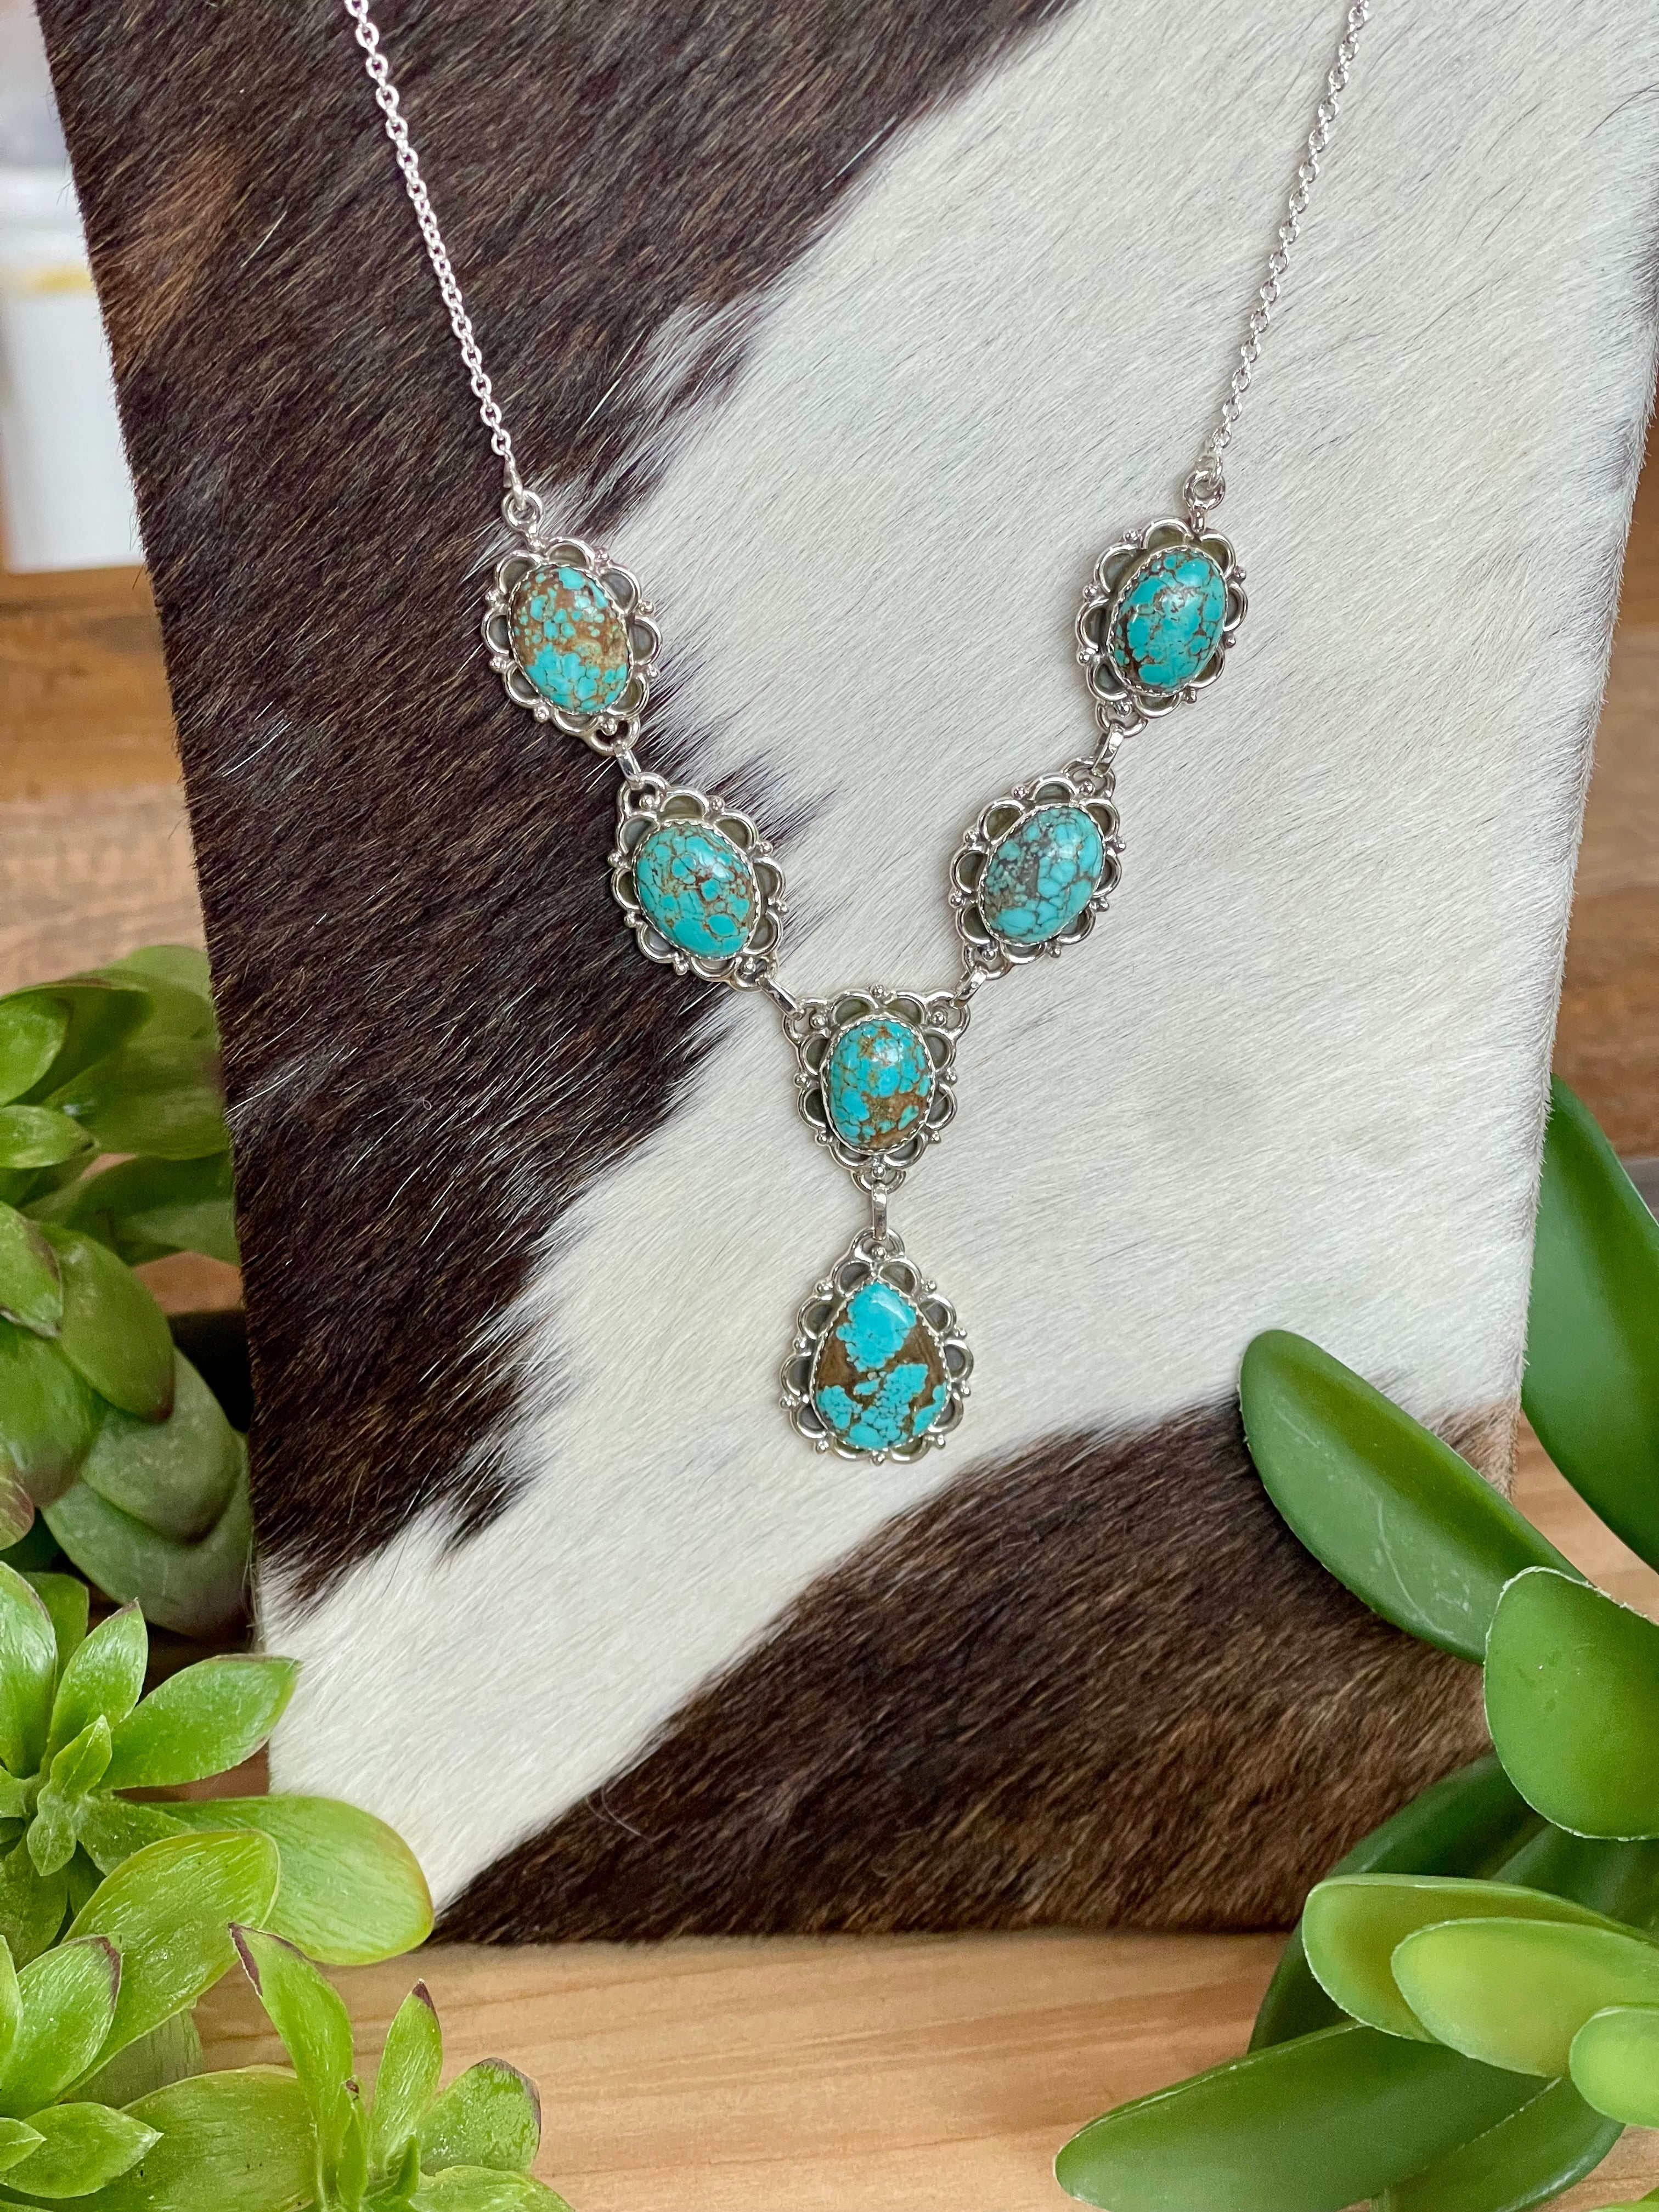 Southwest Handmade Number 8 Turquoise & Sterling Silver Lariat Necklace